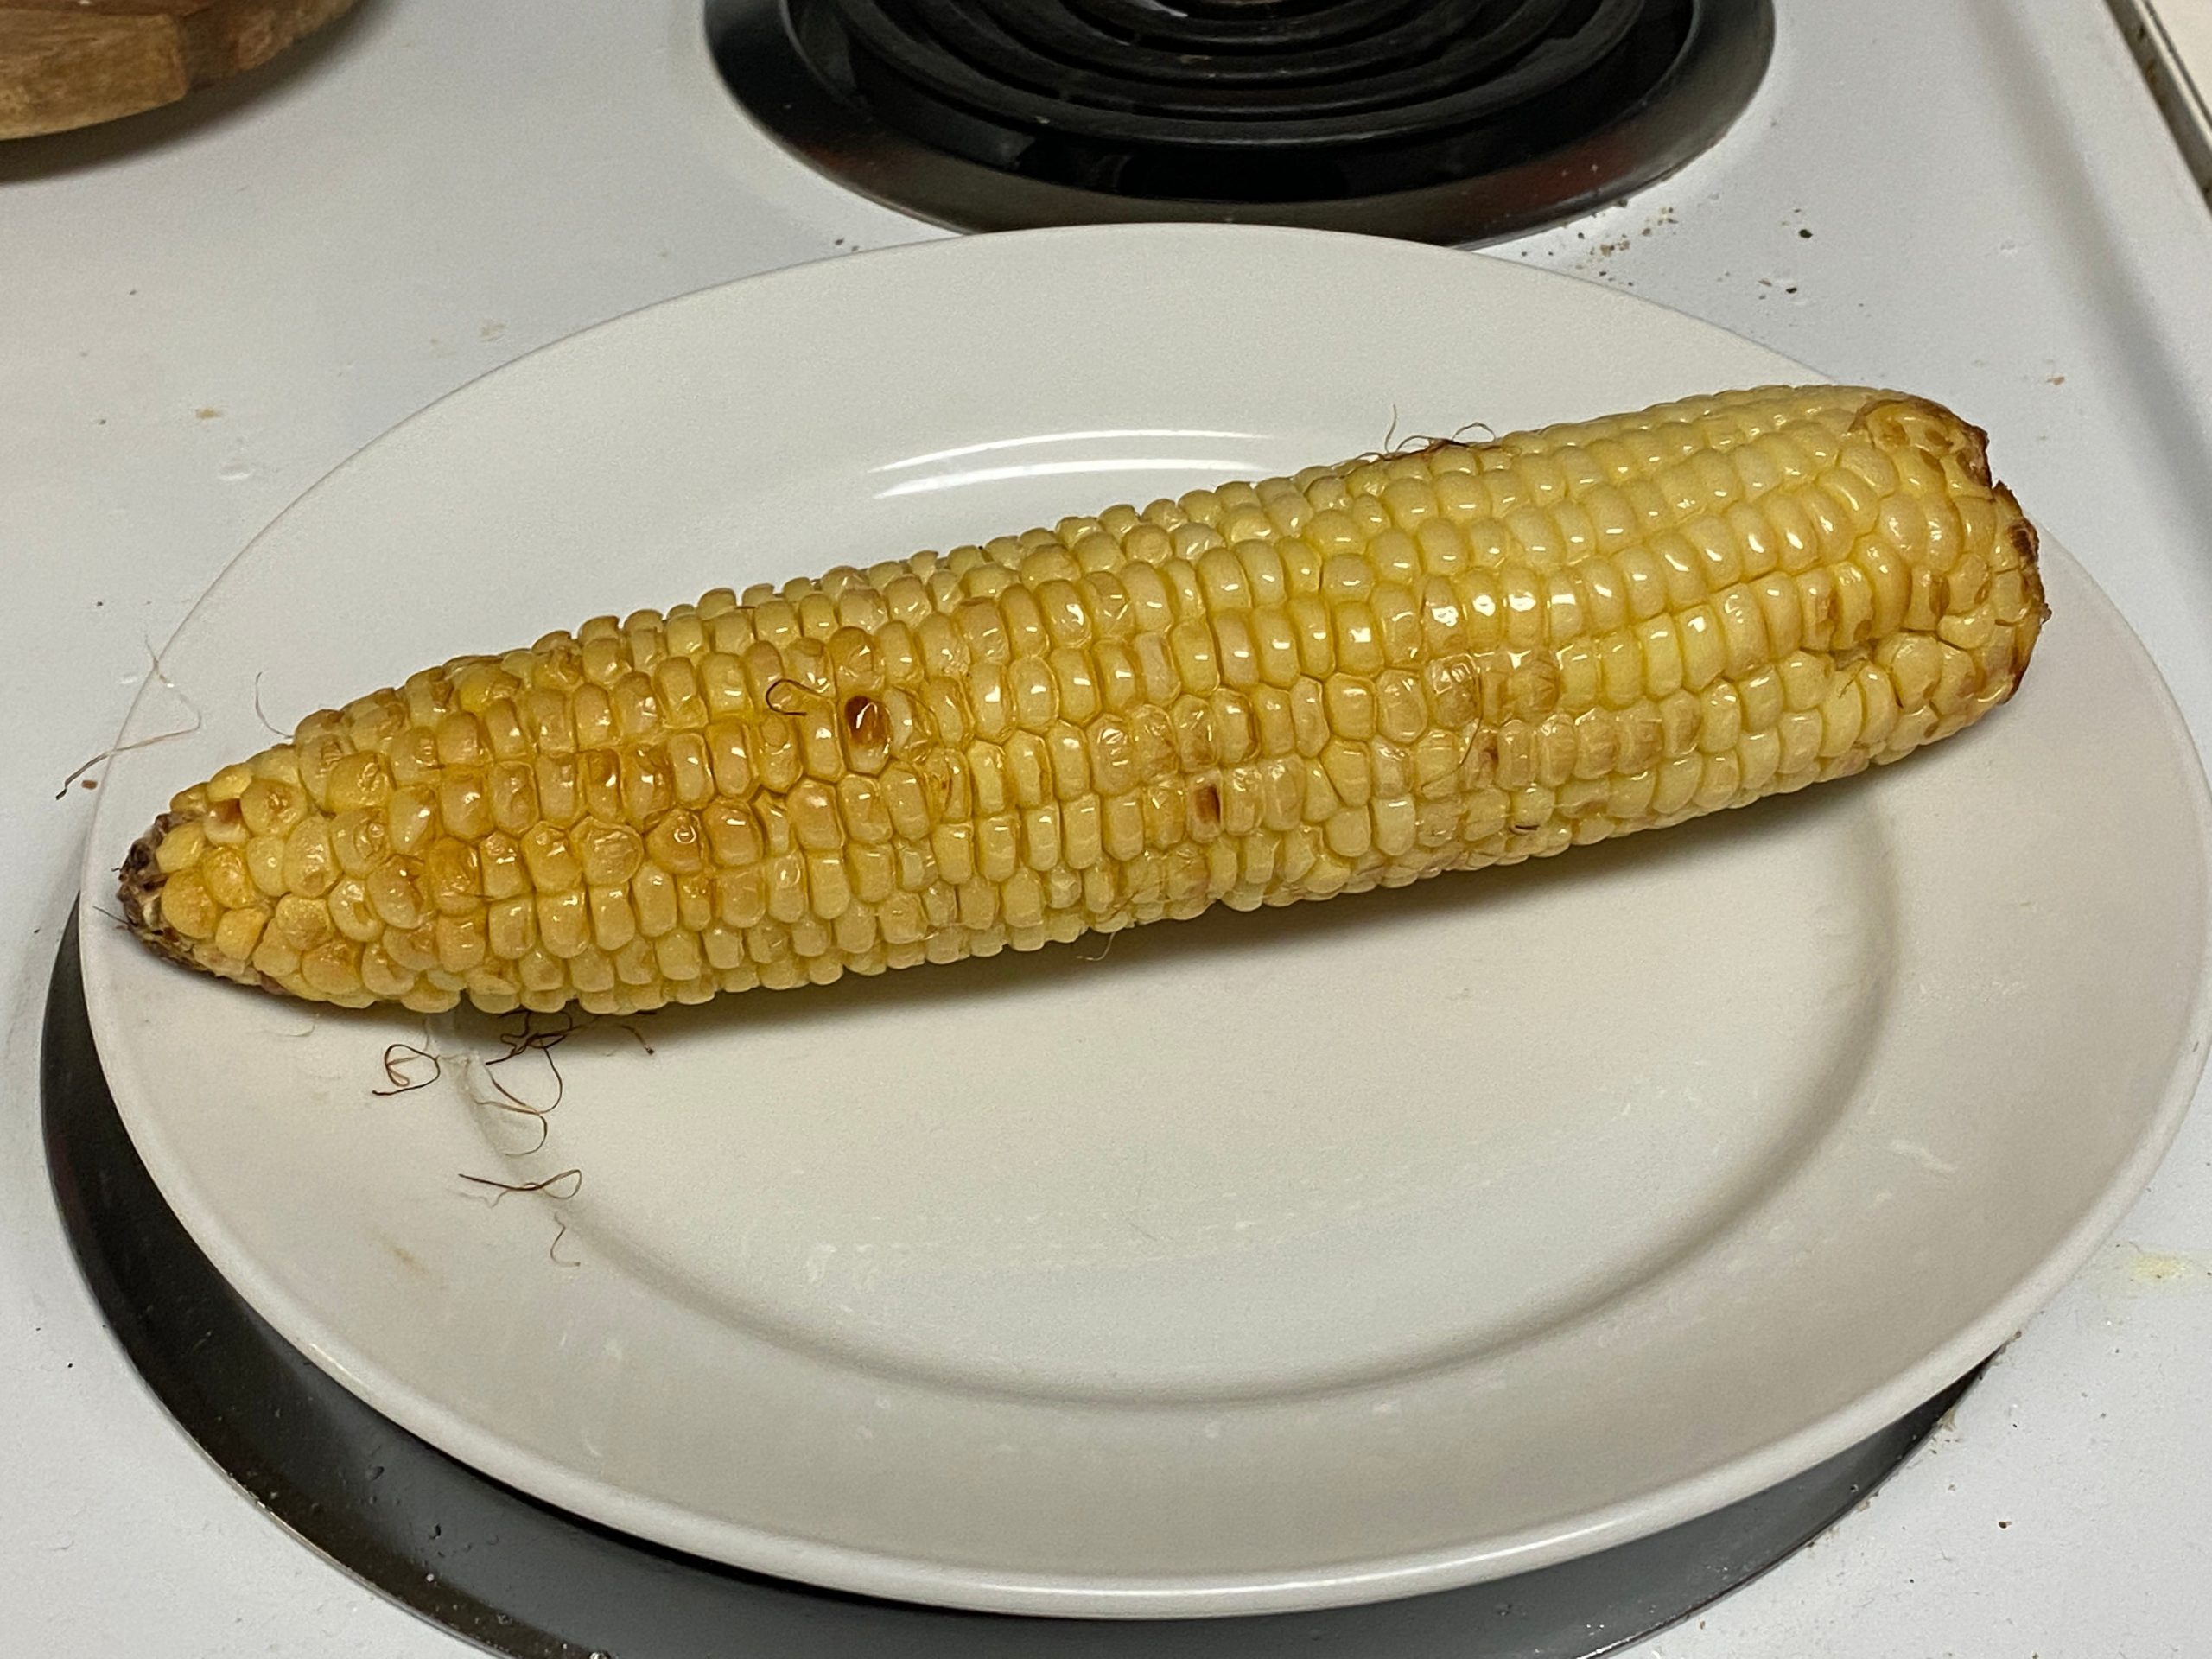 A lightly toasted corn.